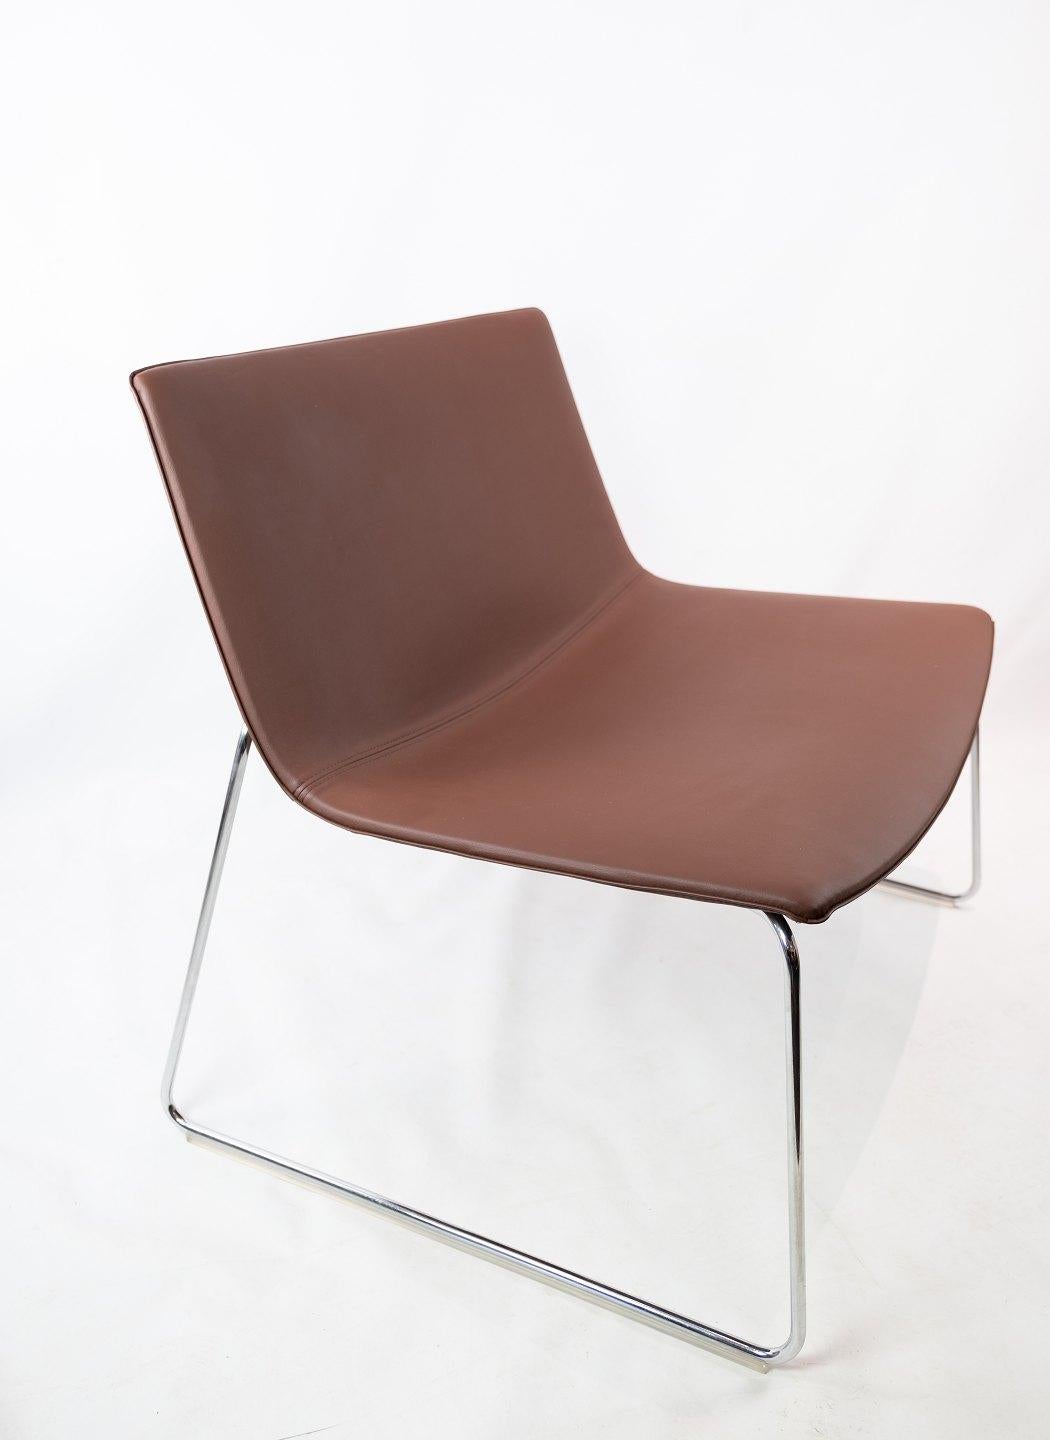 Other Italian Easy Chair, Model 80, Designed by Lievore Altherr Molina and Arper